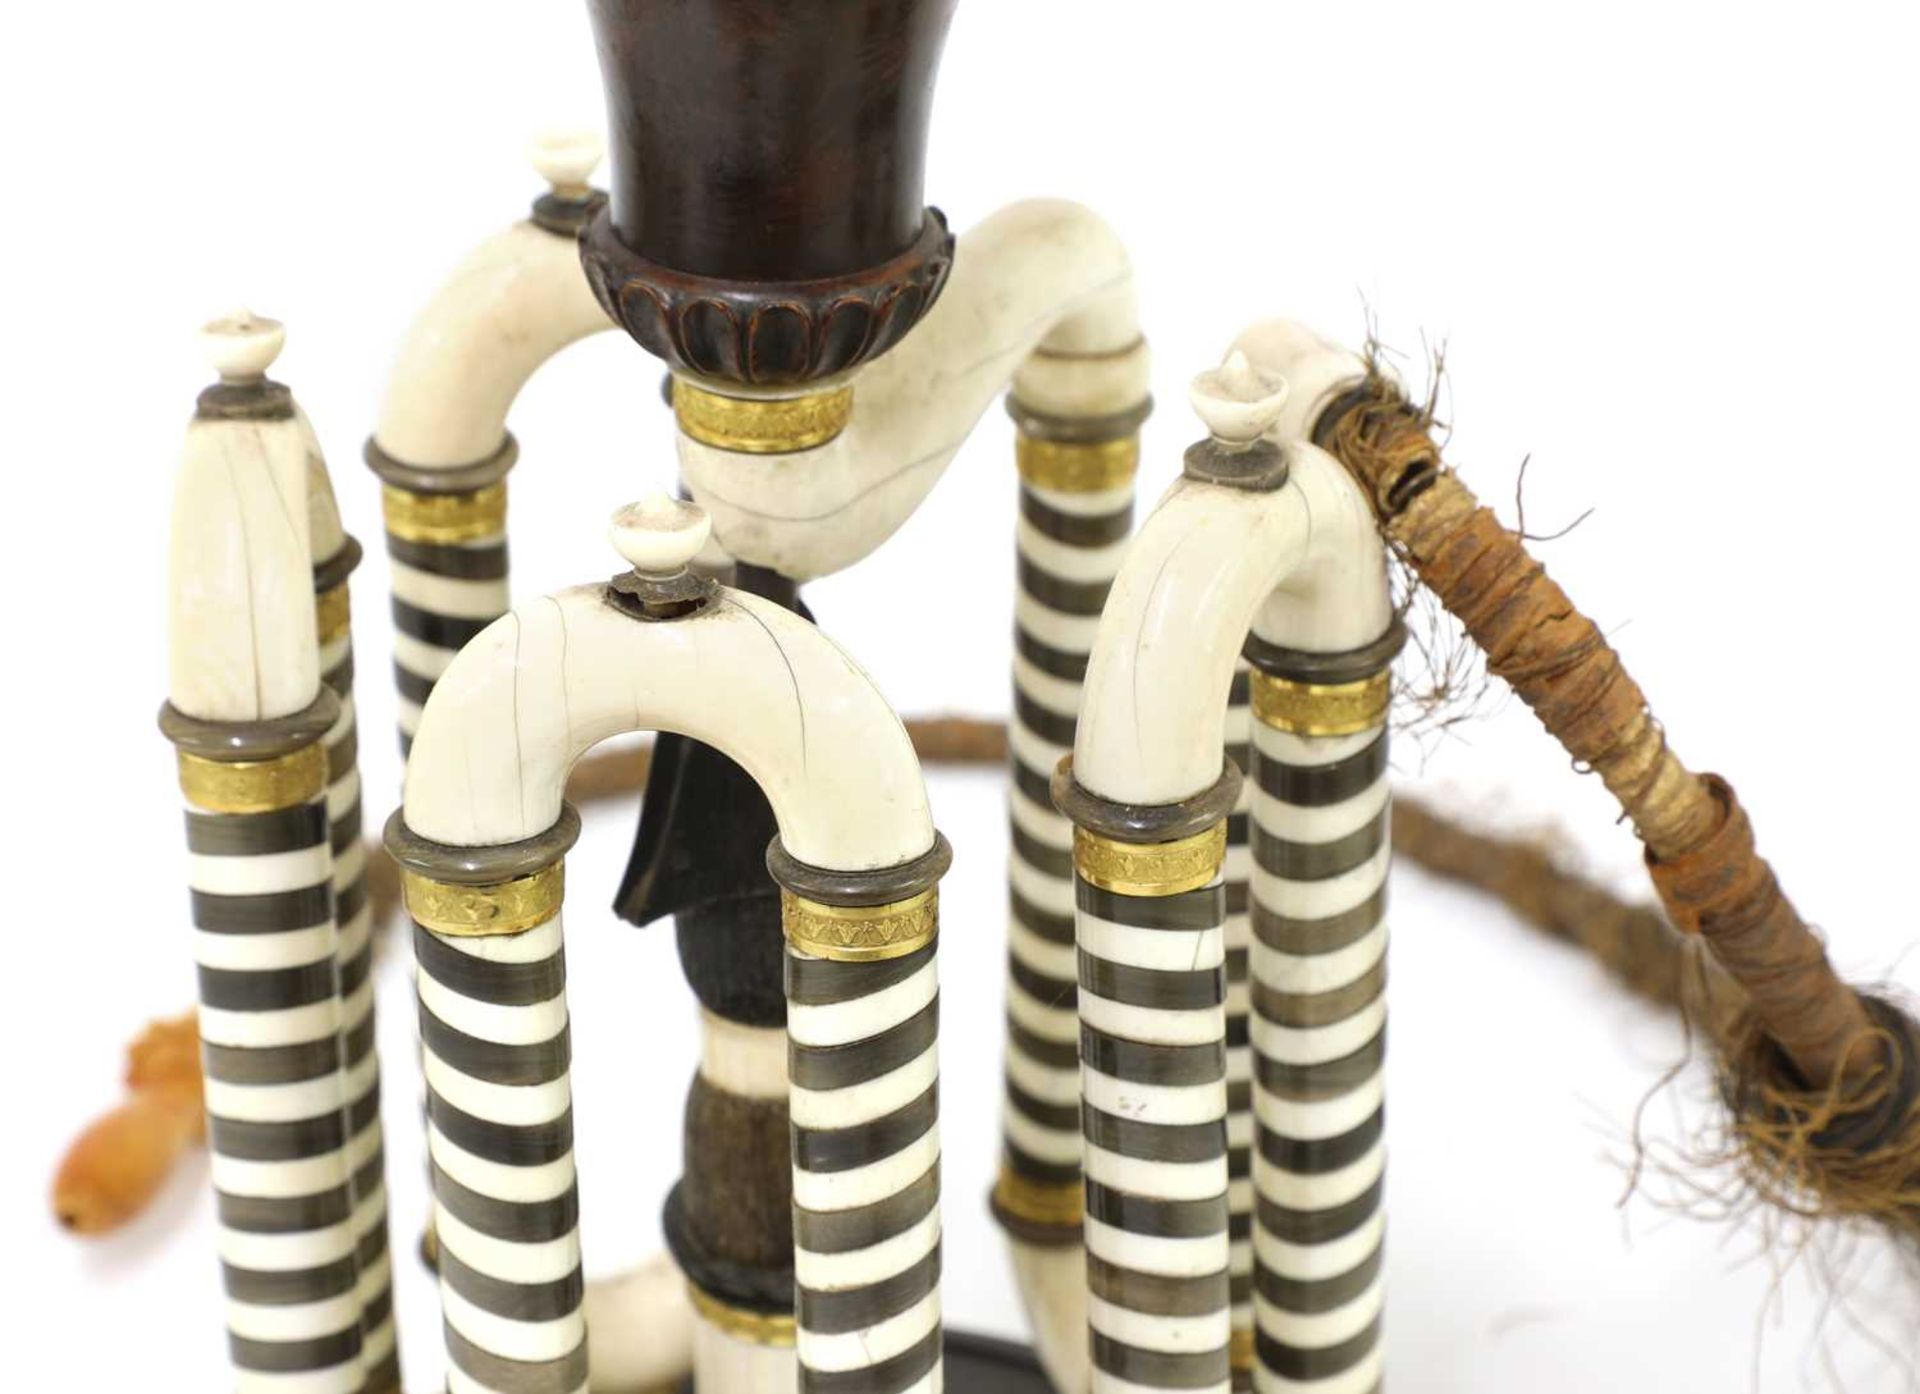 An ivory and horn table hookah pipe, - Image 12 of 22